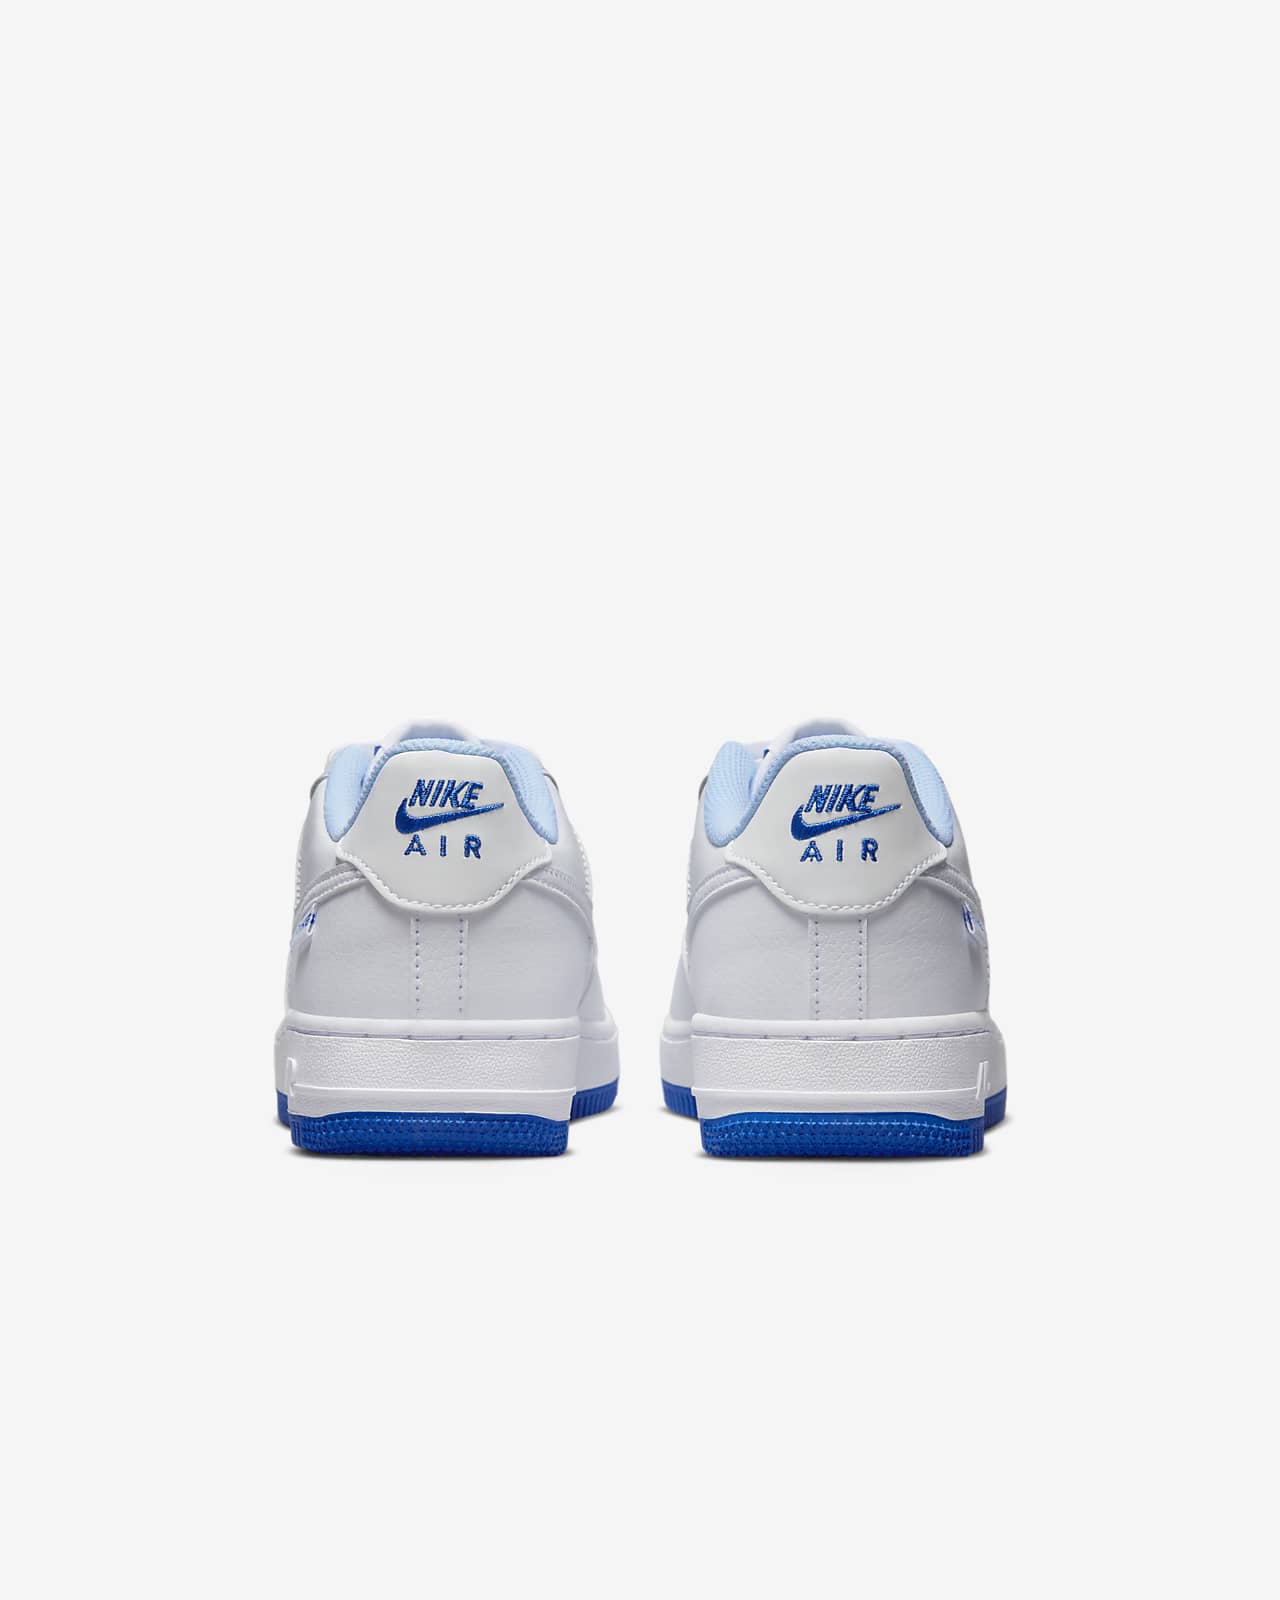 Nike Air Force 1 Low With Velcro Patches Sneaker T-Shirt - Binteez